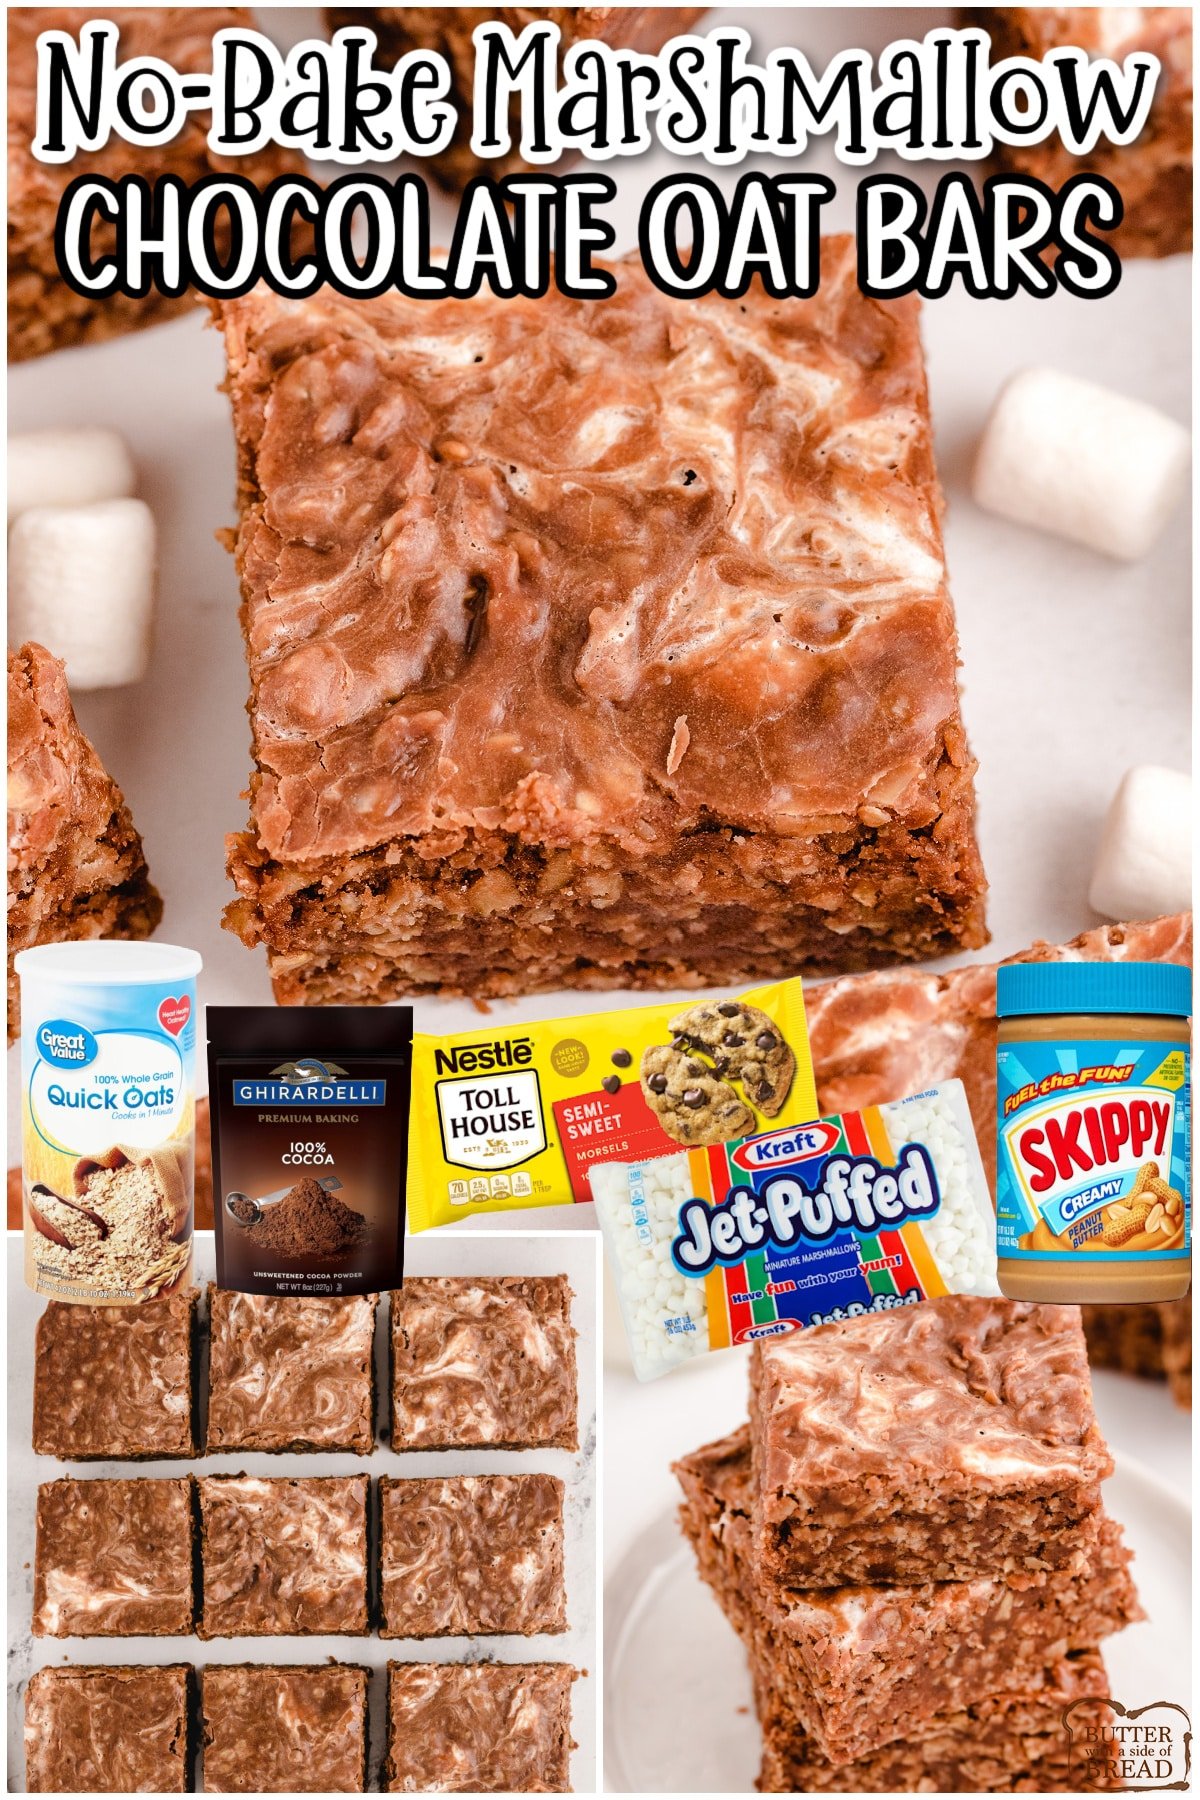 No-Bake Chocolate Marshmallow Bars are a fantastic summer-time treat made with peanut butter, oats and marshmallows. Tasty chocolate dessert for when it's too hot to turn the oven on!